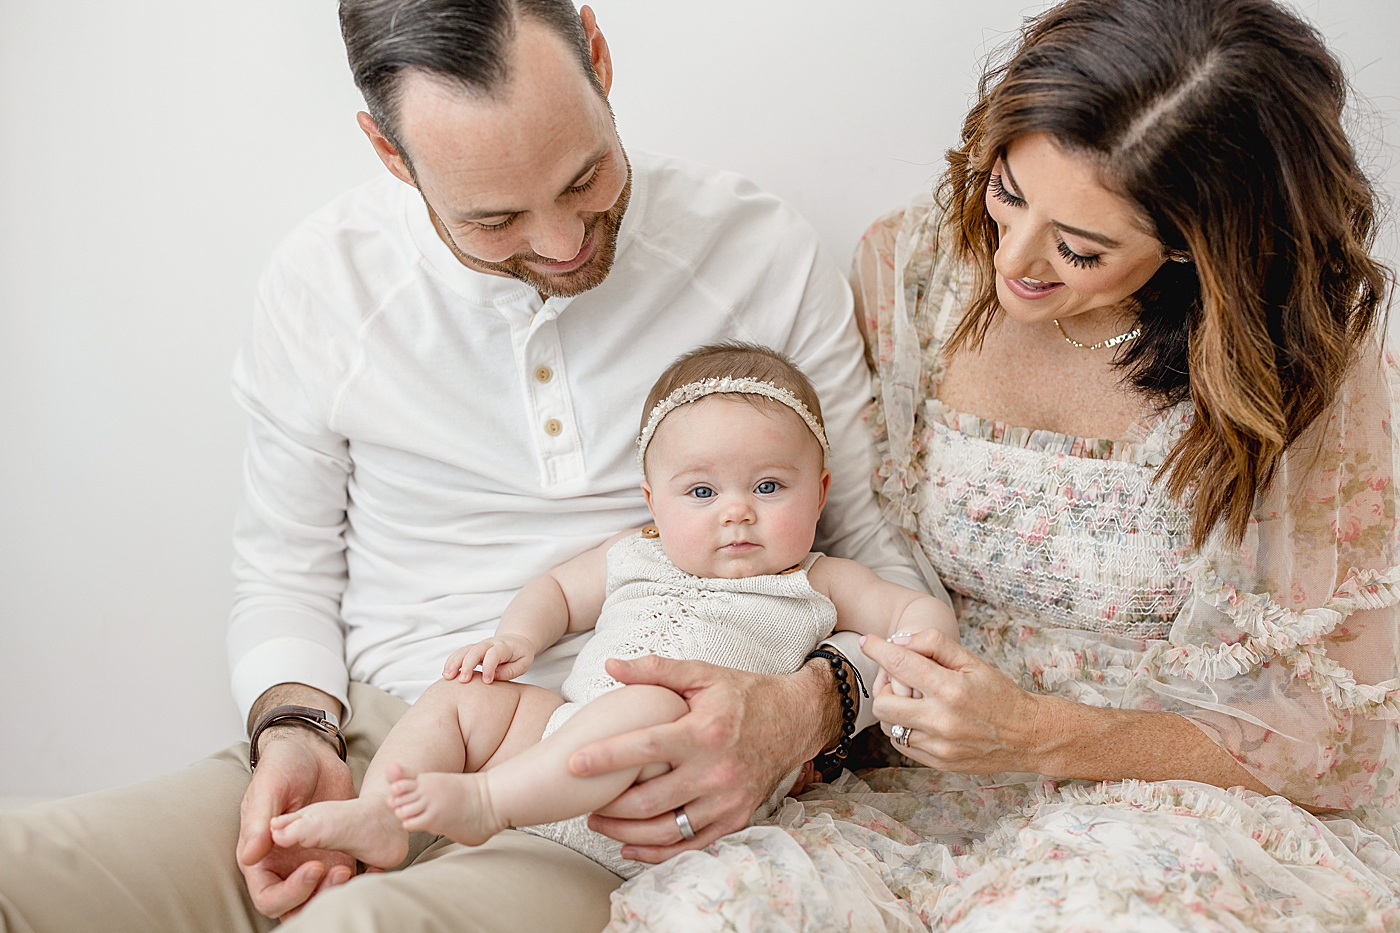 Family portraits of parents and baby girl during six month milestone session. Photo by Brittany Elise Photography.